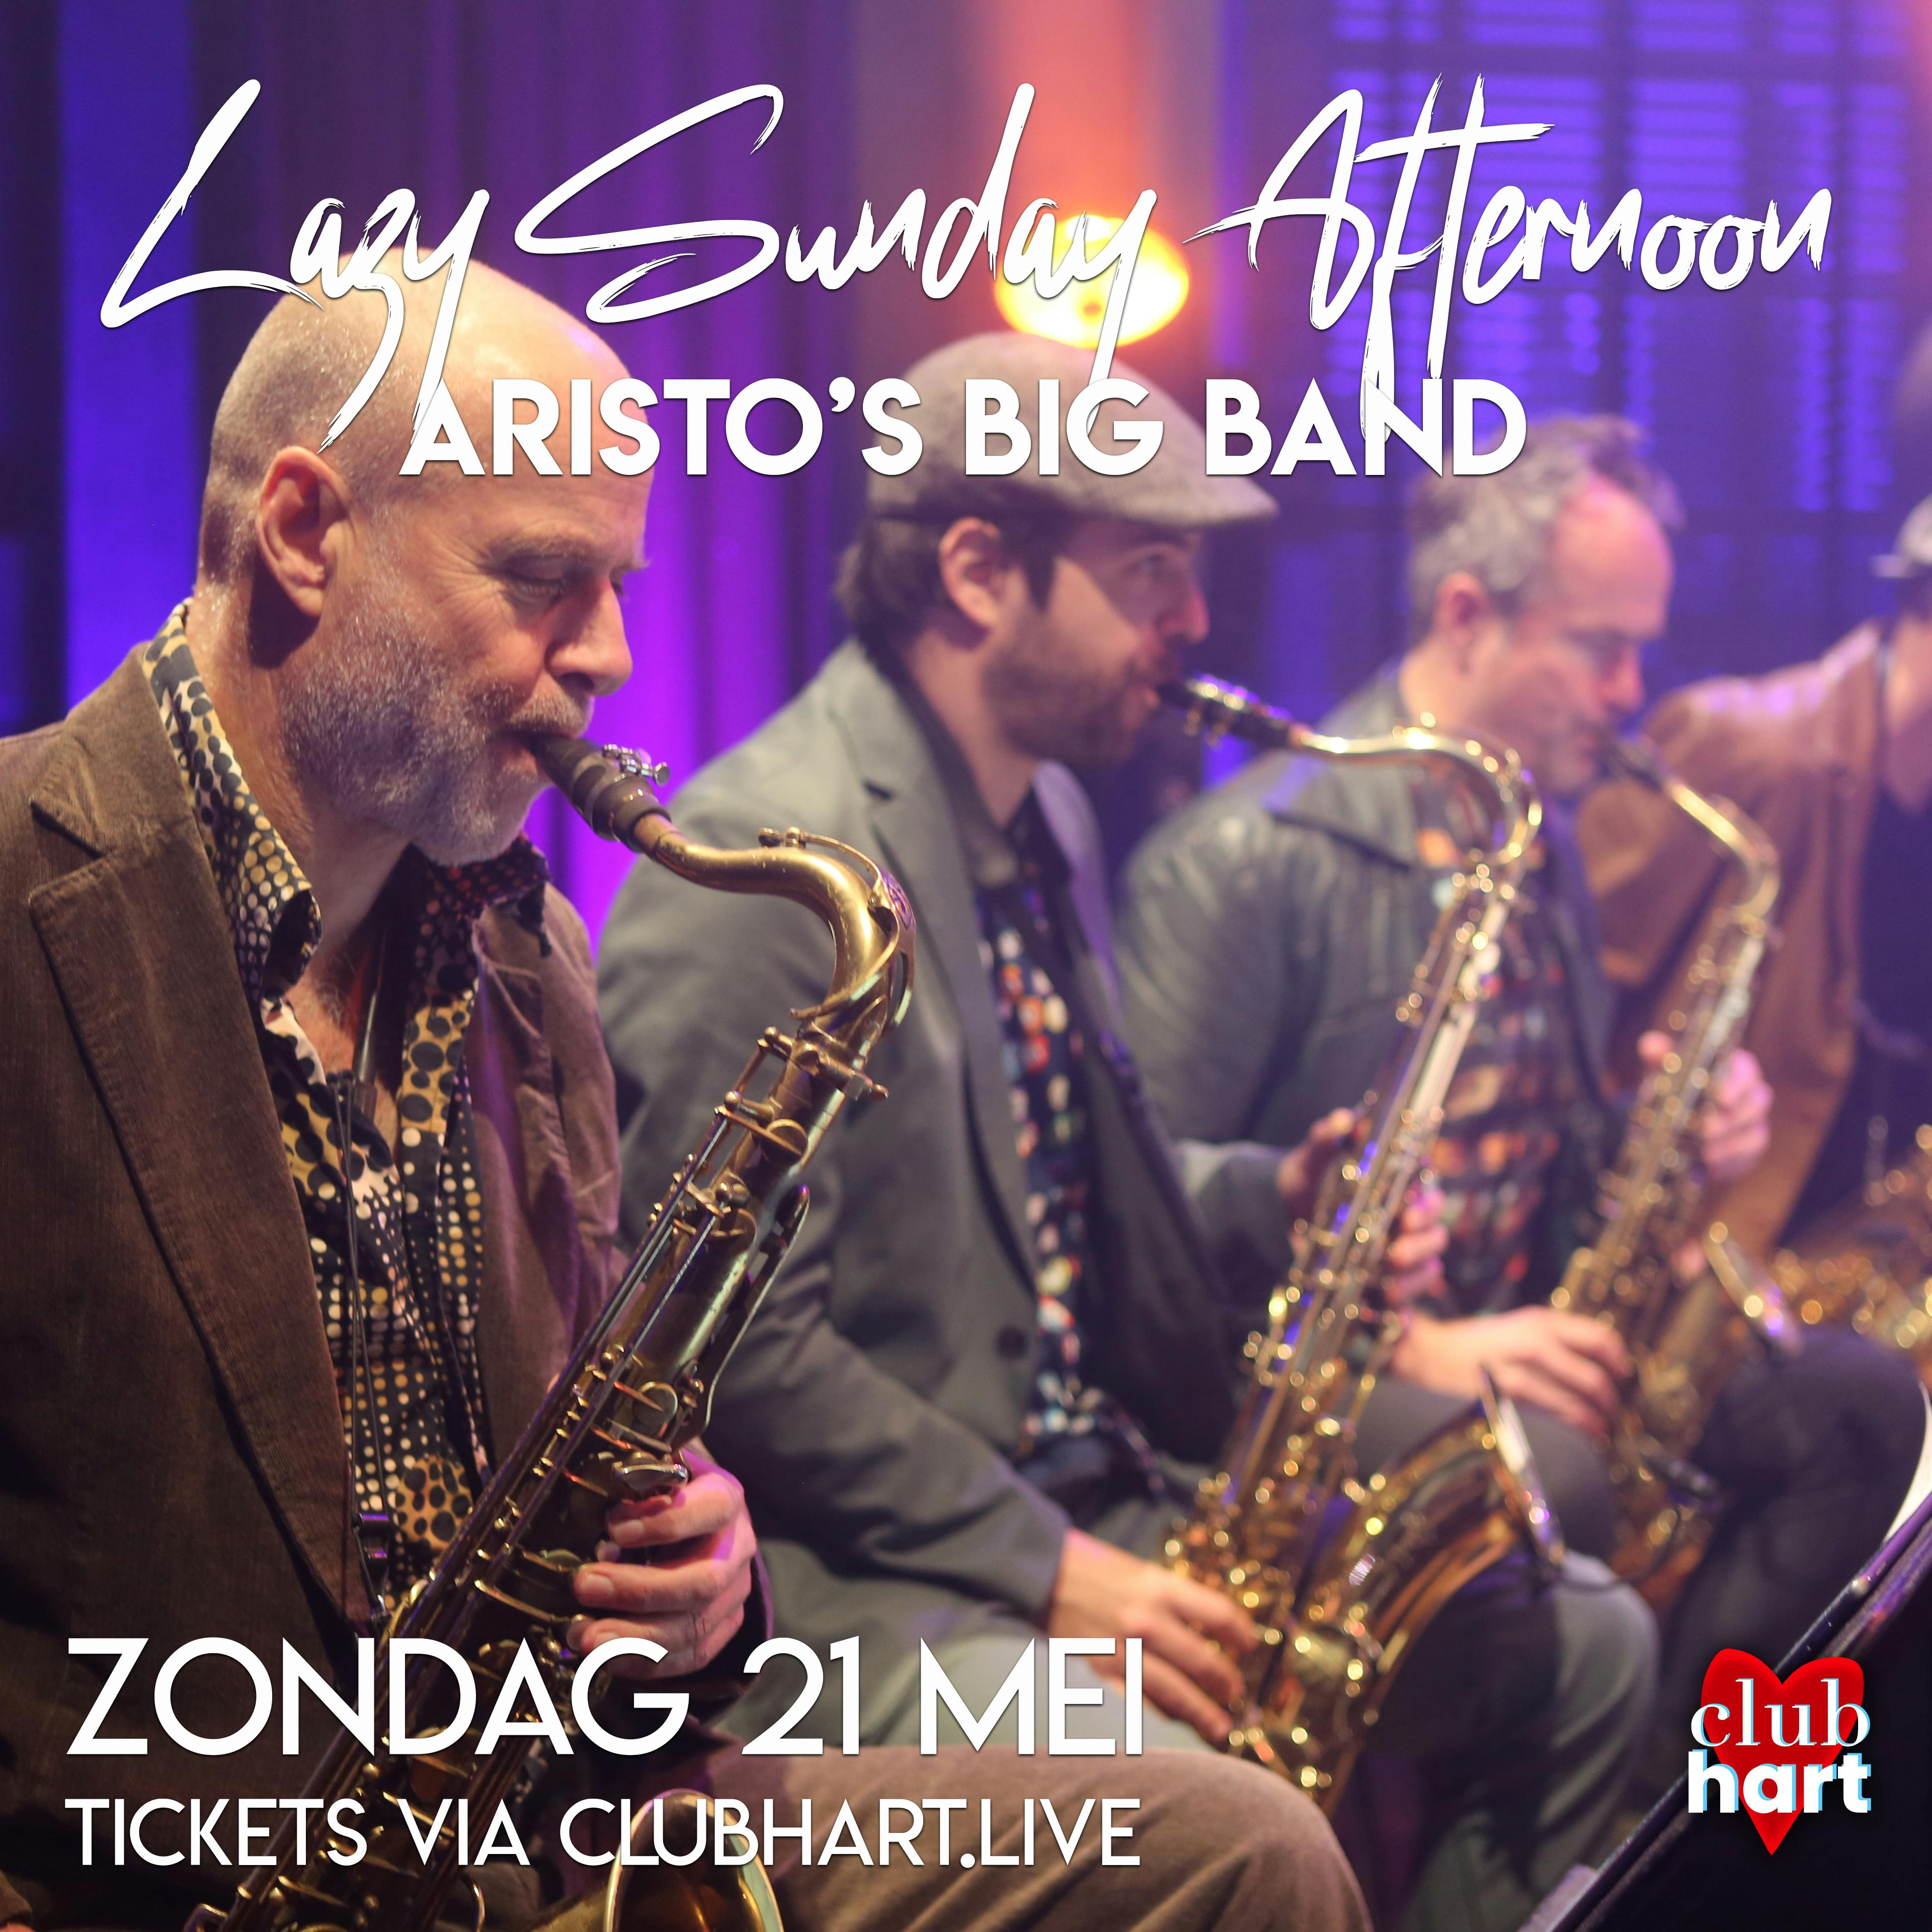 Lazy Sunday Afternoon with the Aristo's Big Band